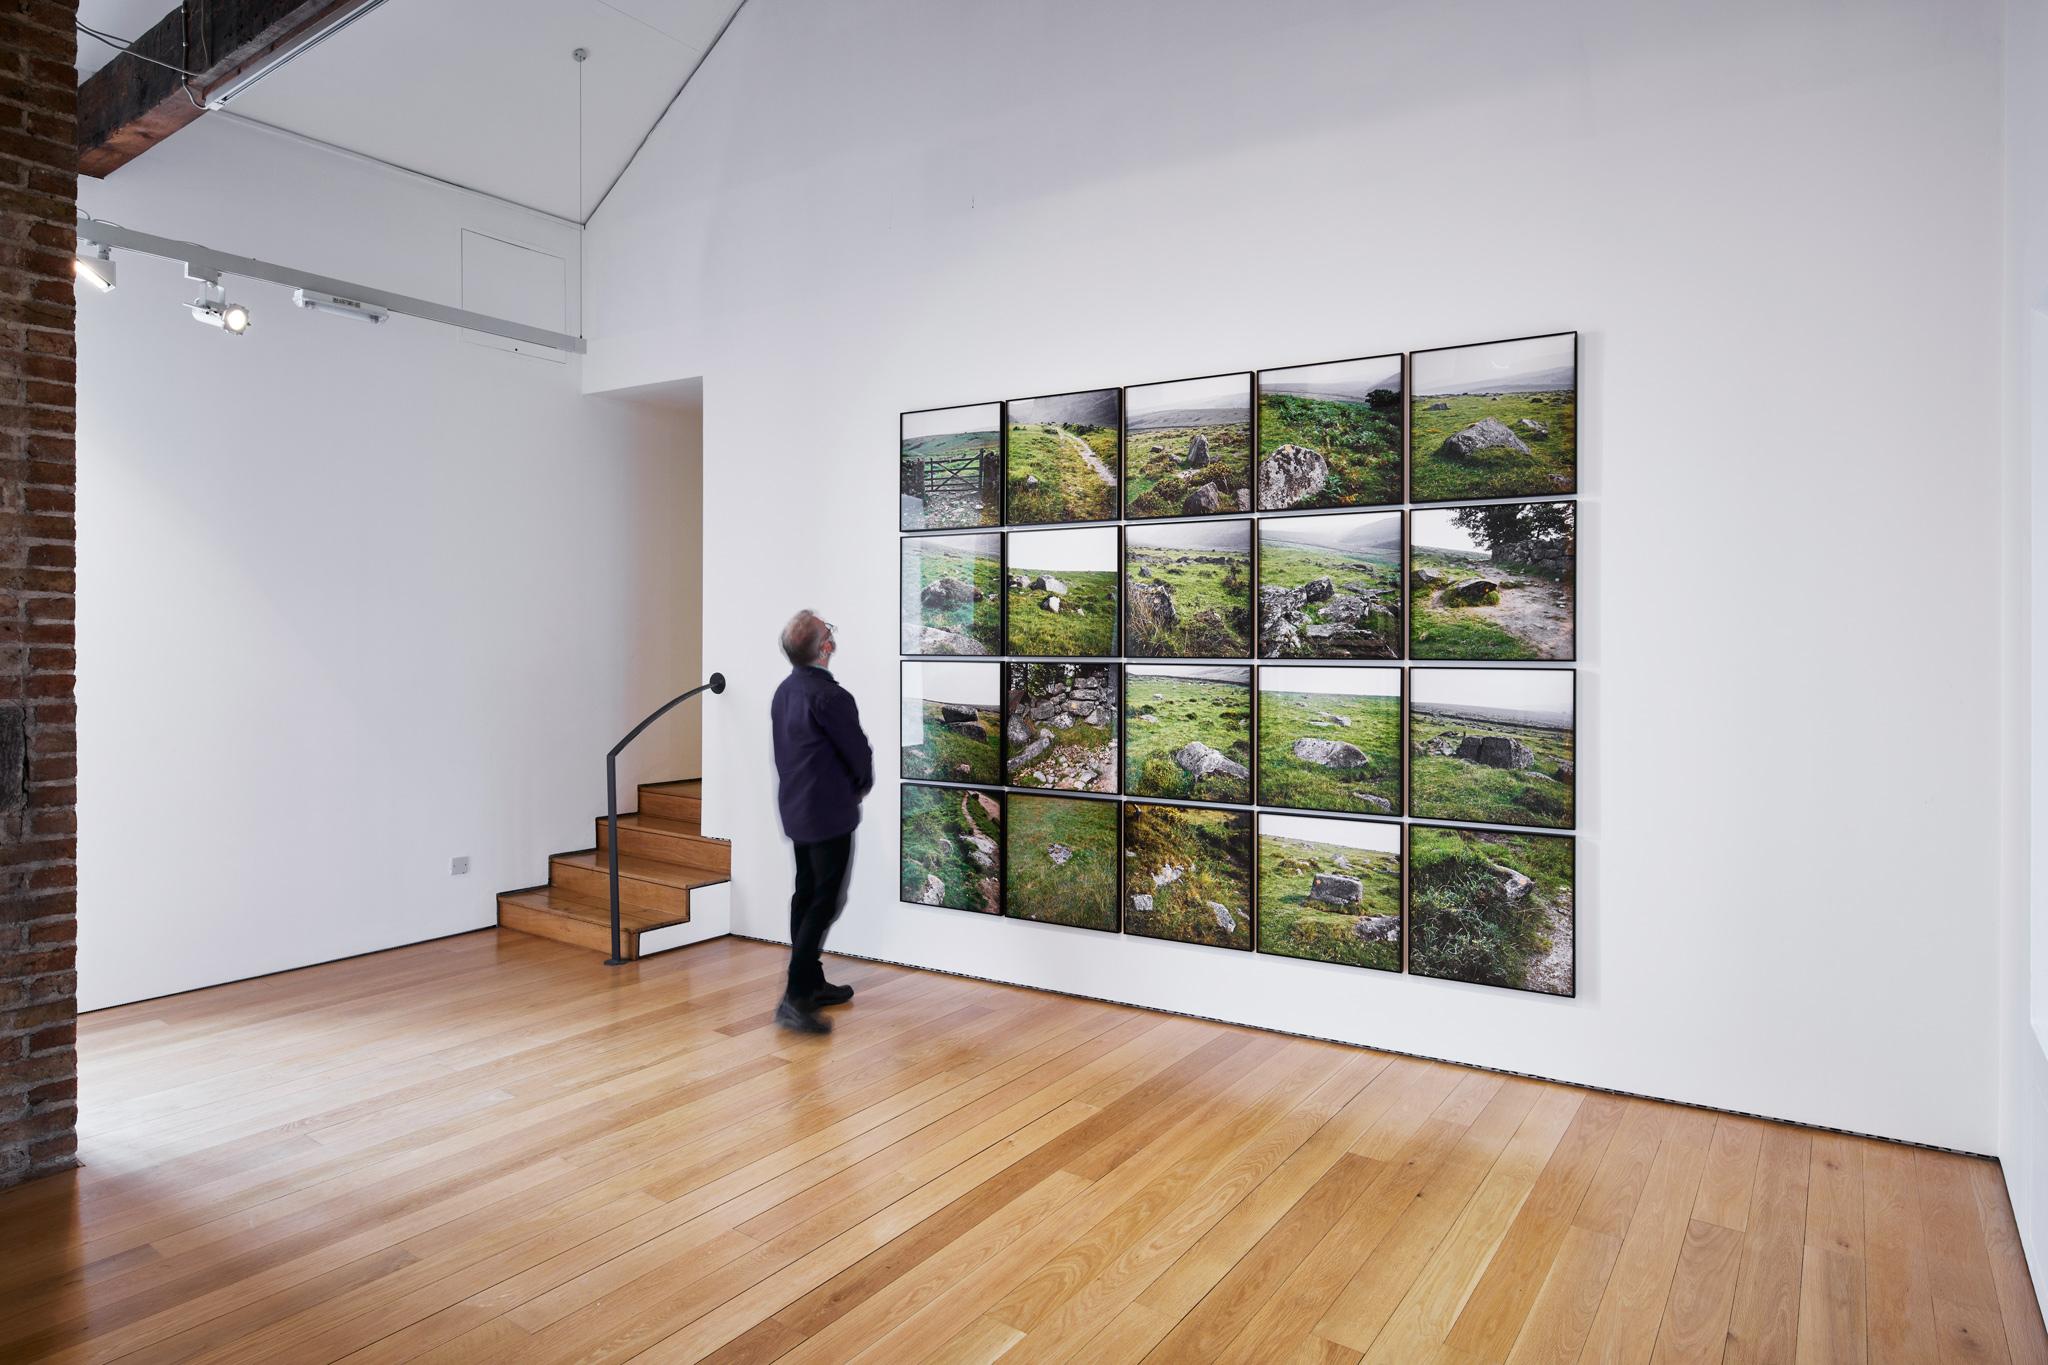 person standing in a gallery space looking at a large grid of green landscape photographic images